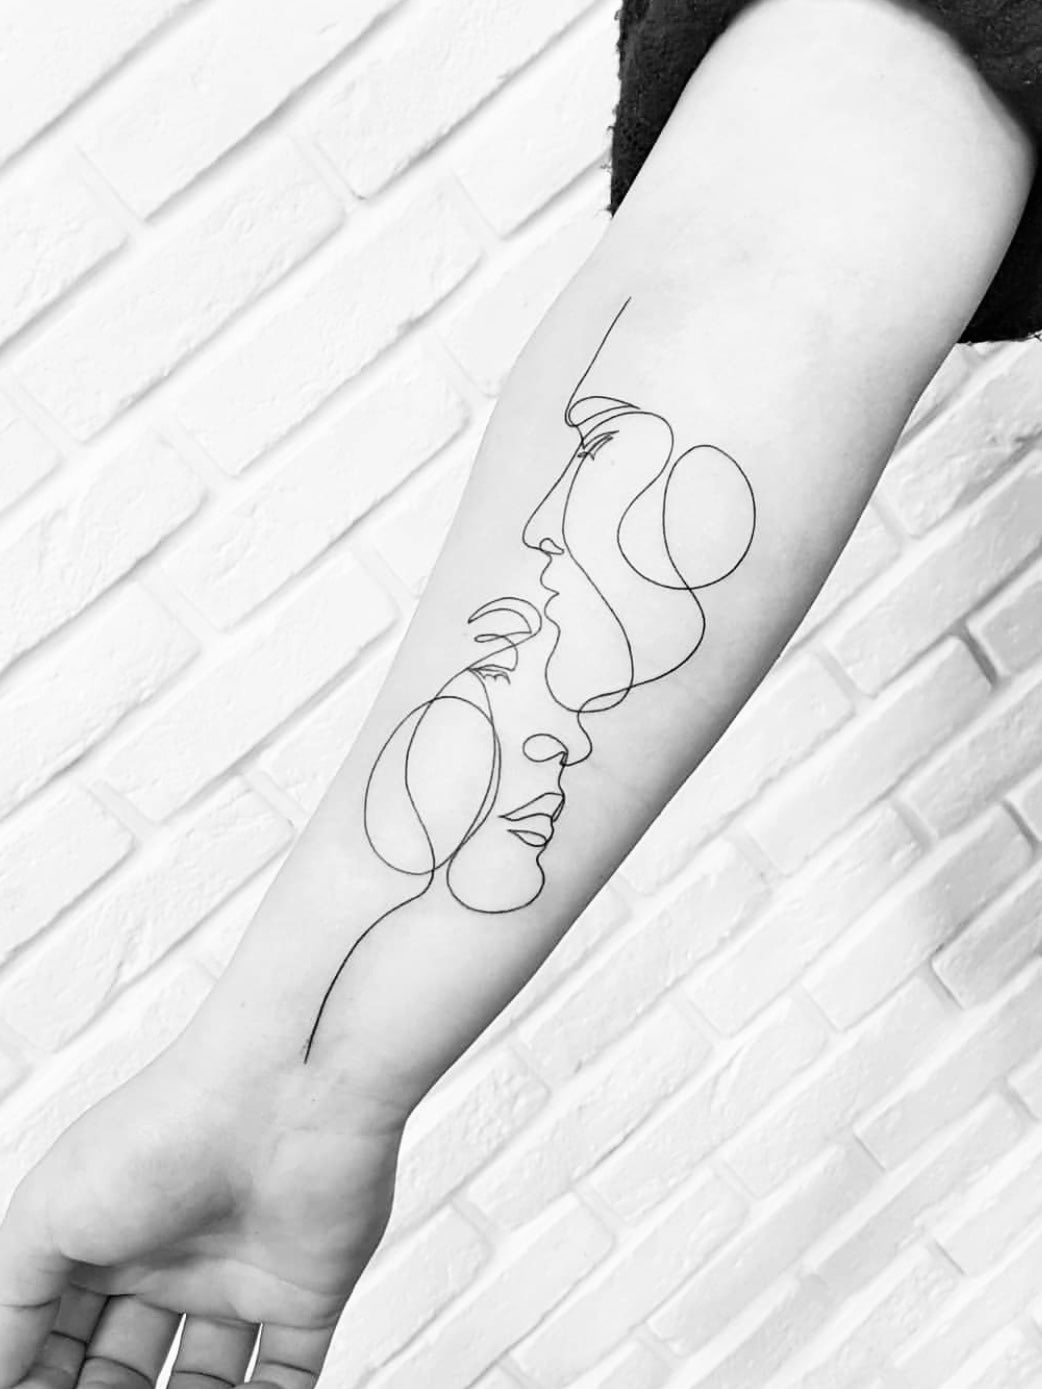 87 Cute and Inspiring Heart Tattoos With Meaning